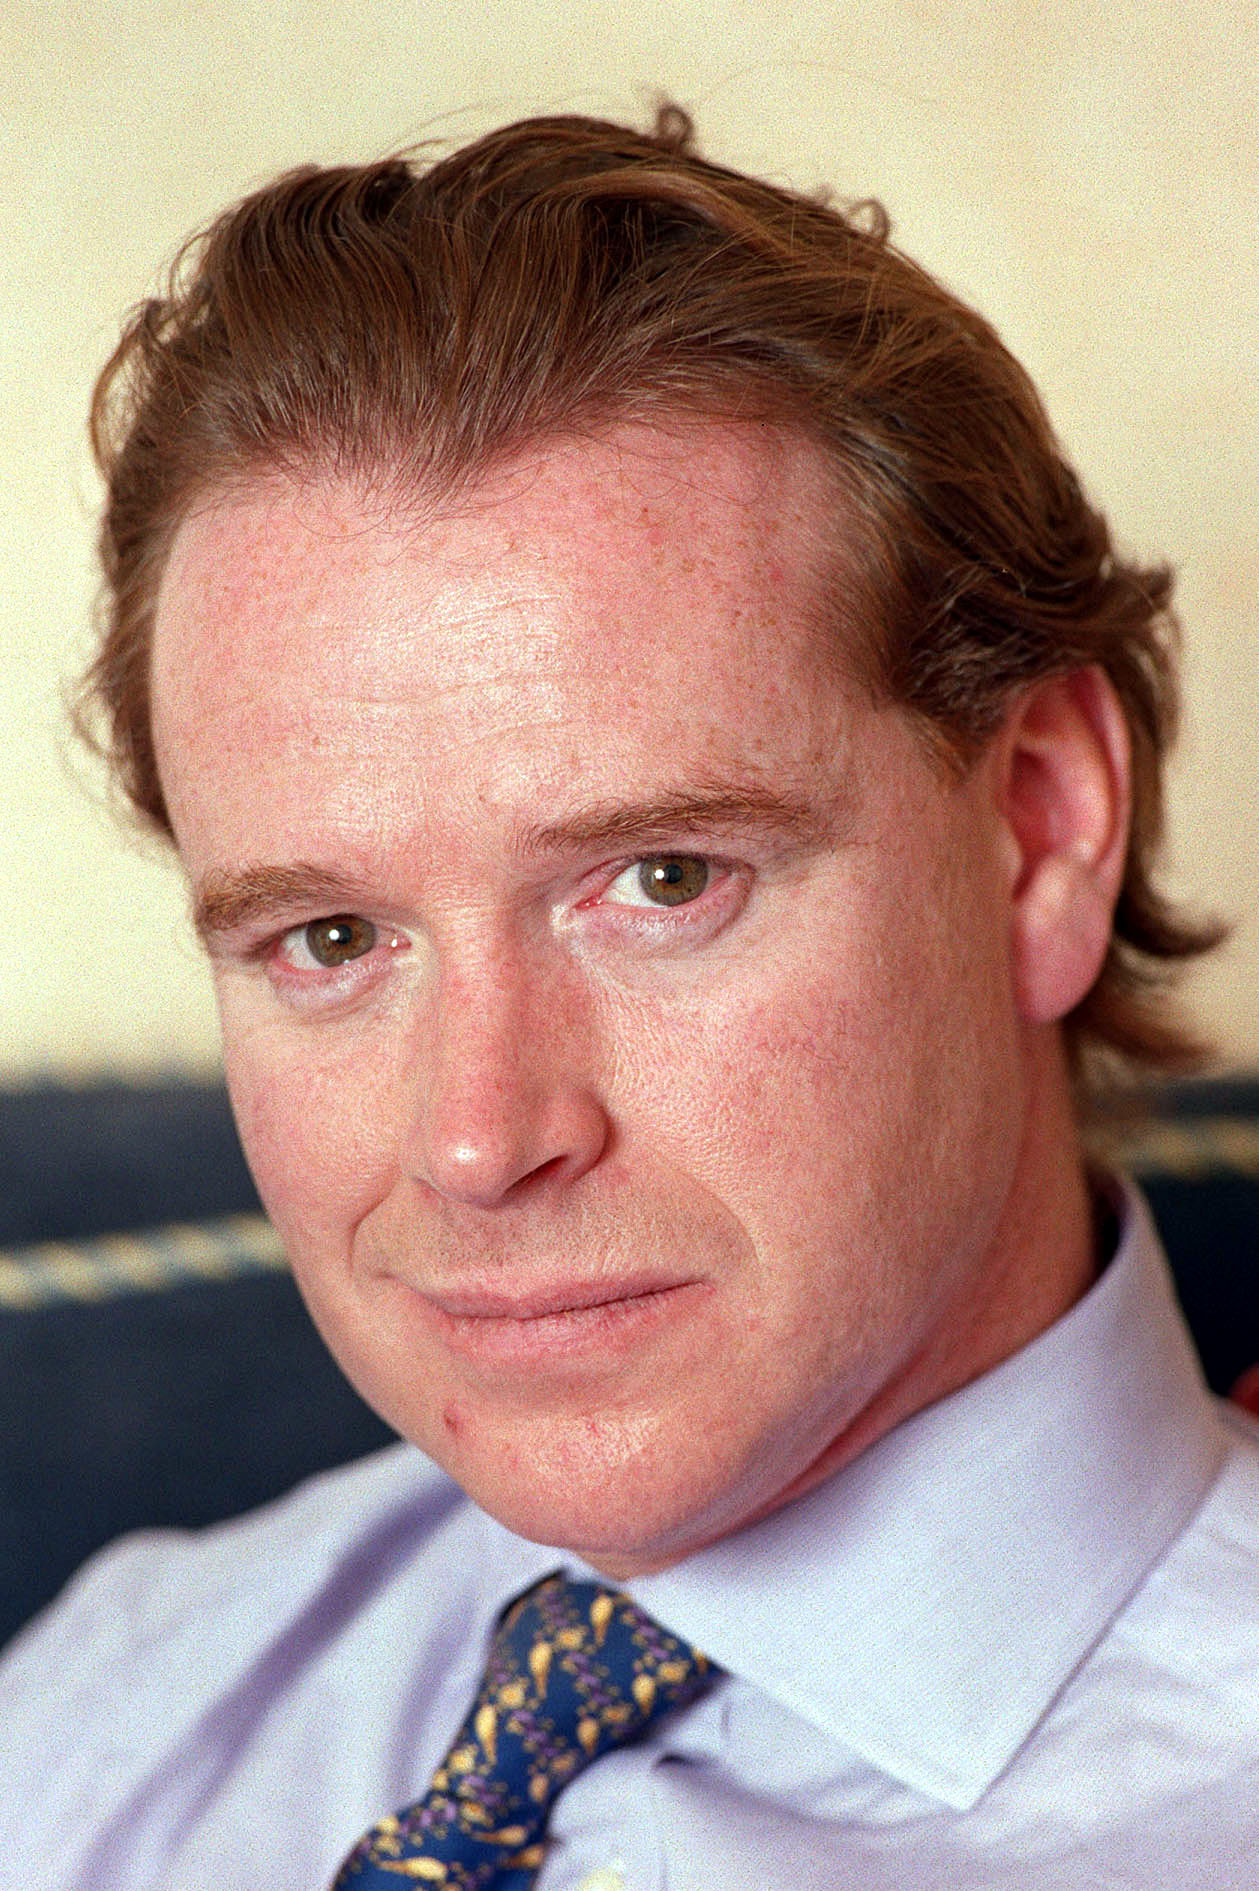 James Hewitt pictured at his London home on October 18, 1999. | Source: Getty Images